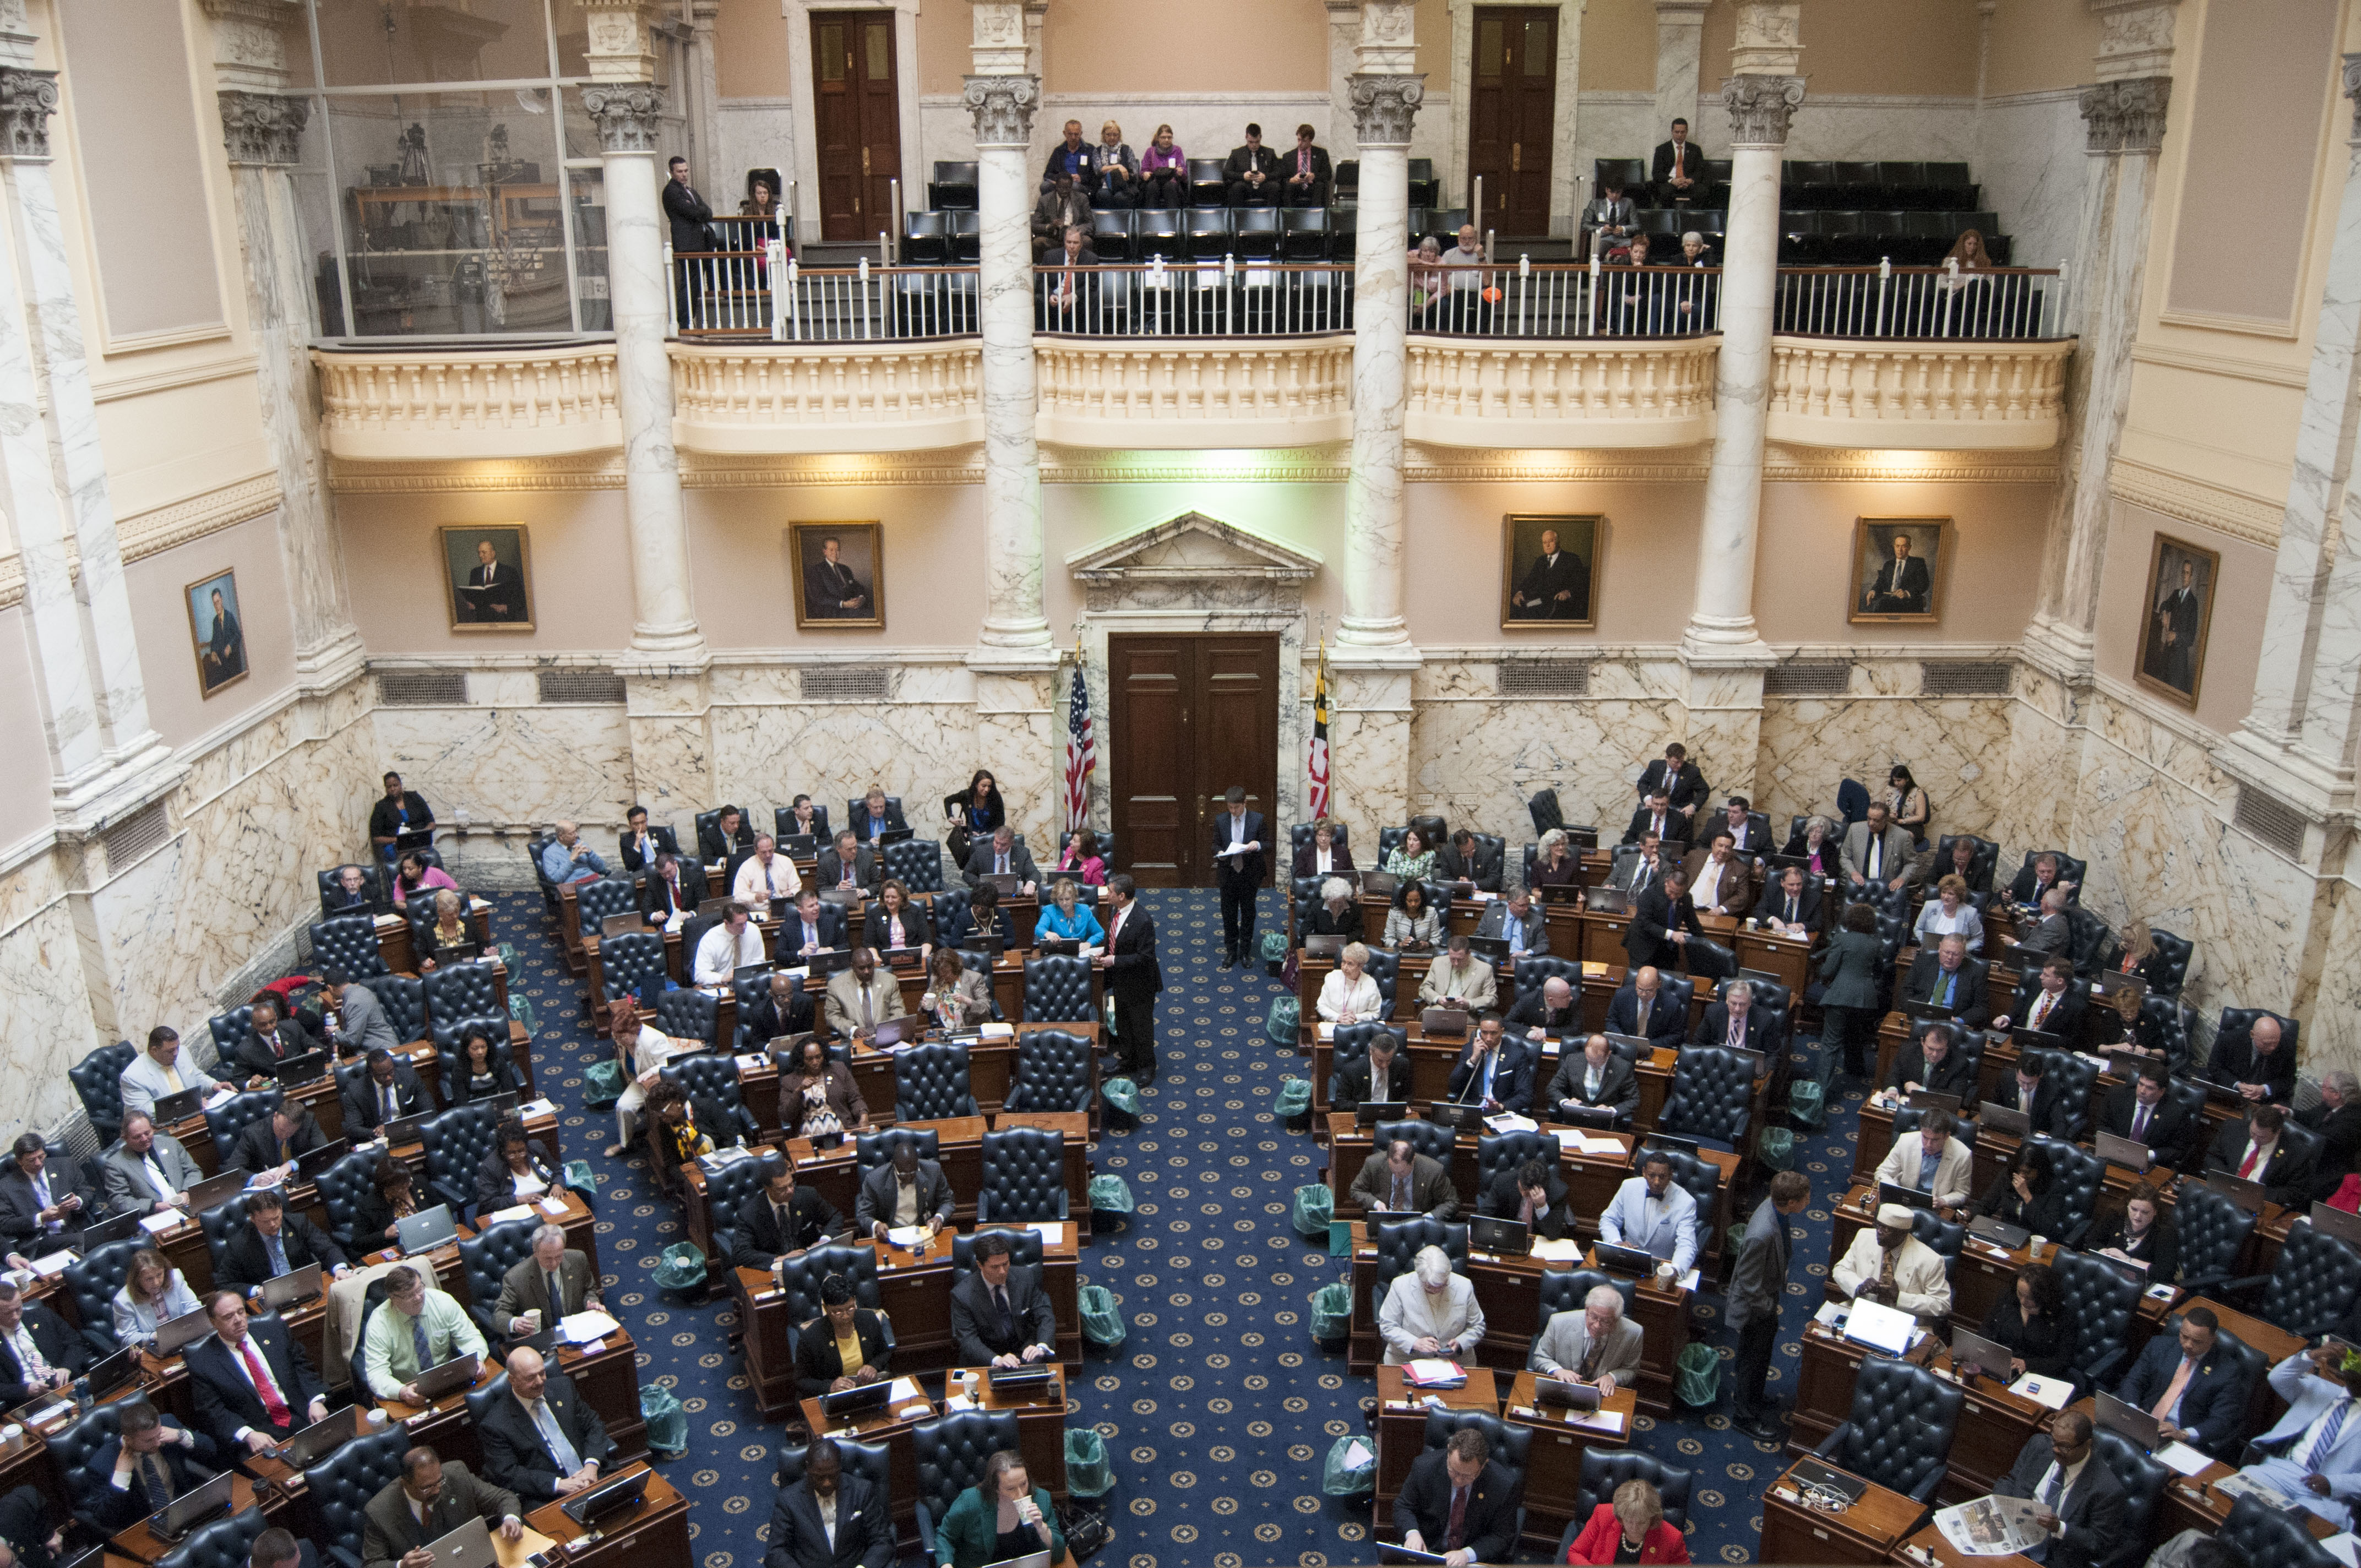 Live from Annapolis, it’s the Maryland General Assembly — maybe some day